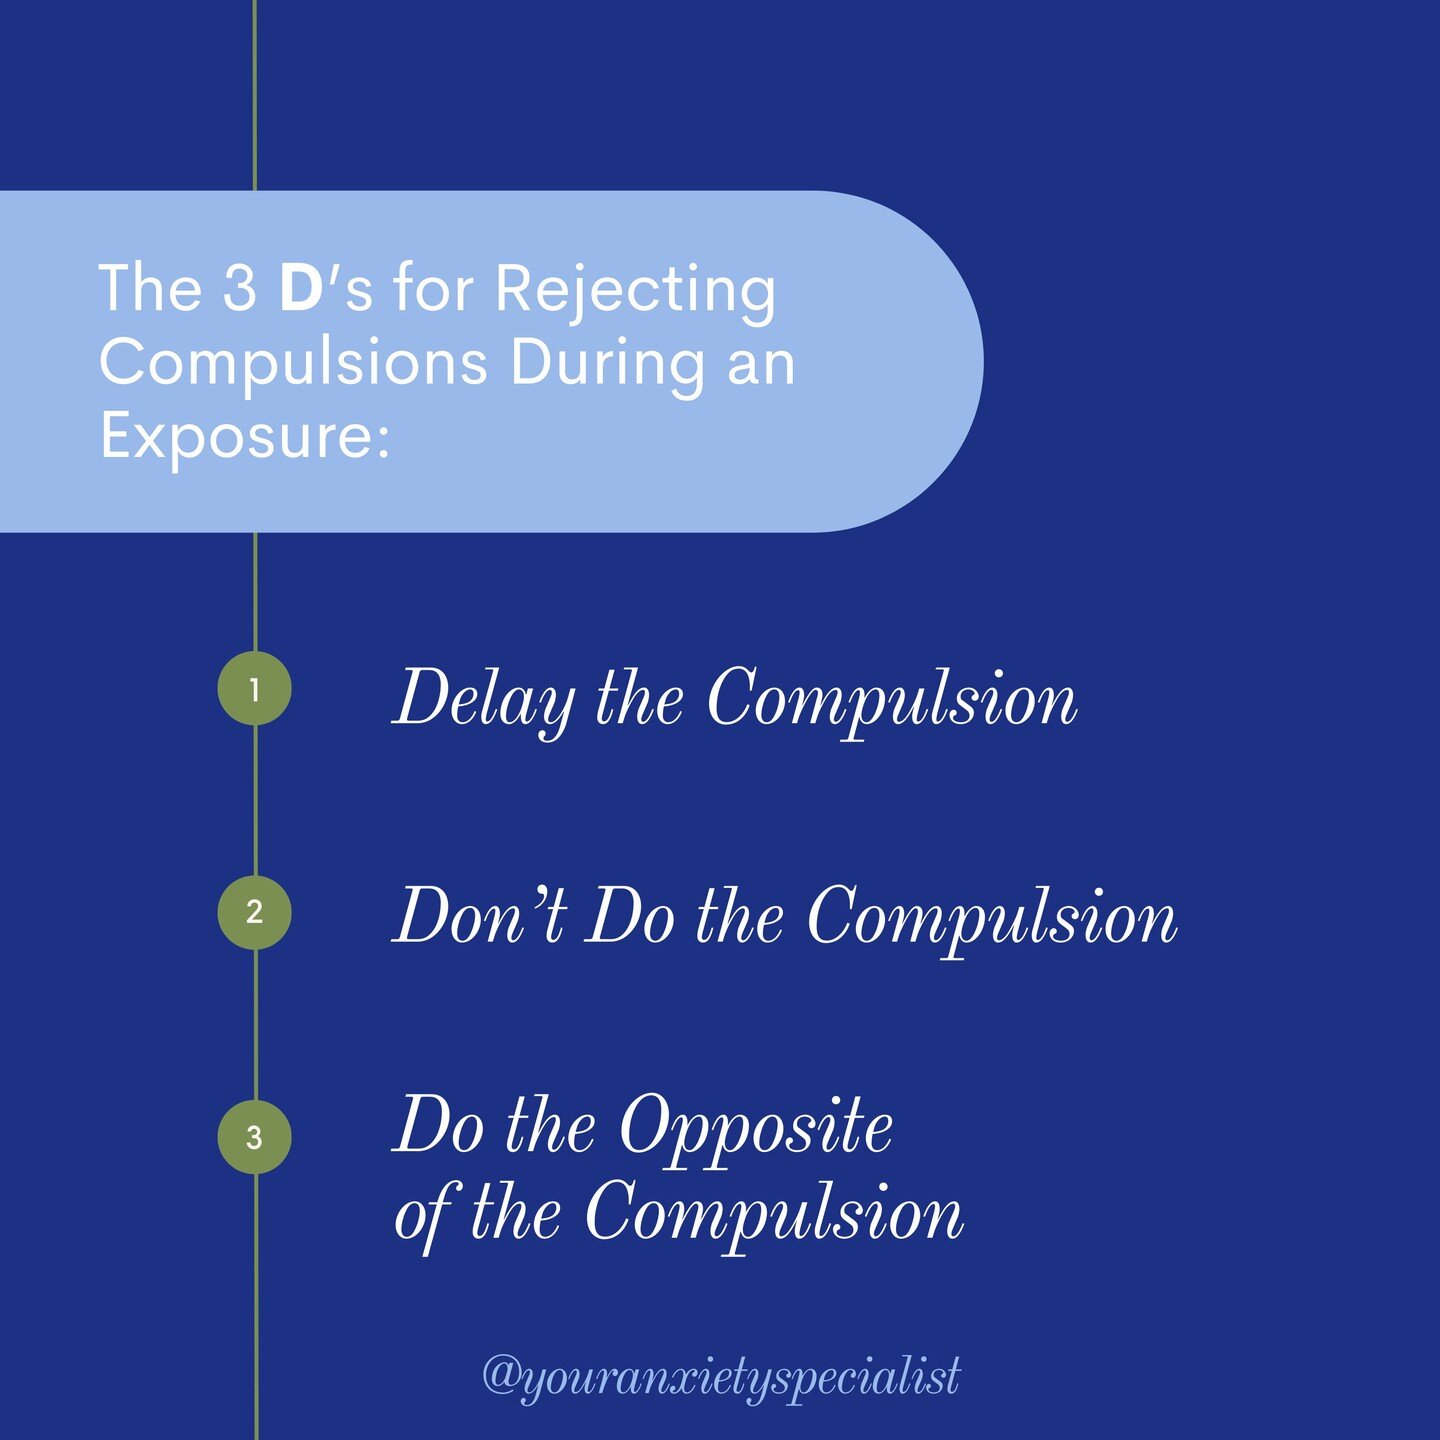 When starting exposures, it can feel very difficult to conceptualize how to reject compulsions. From my experience, the 3 D's are an overarching way to reject compulsions. That said, sometimes they can overlap. For example, doing the opposite can fee